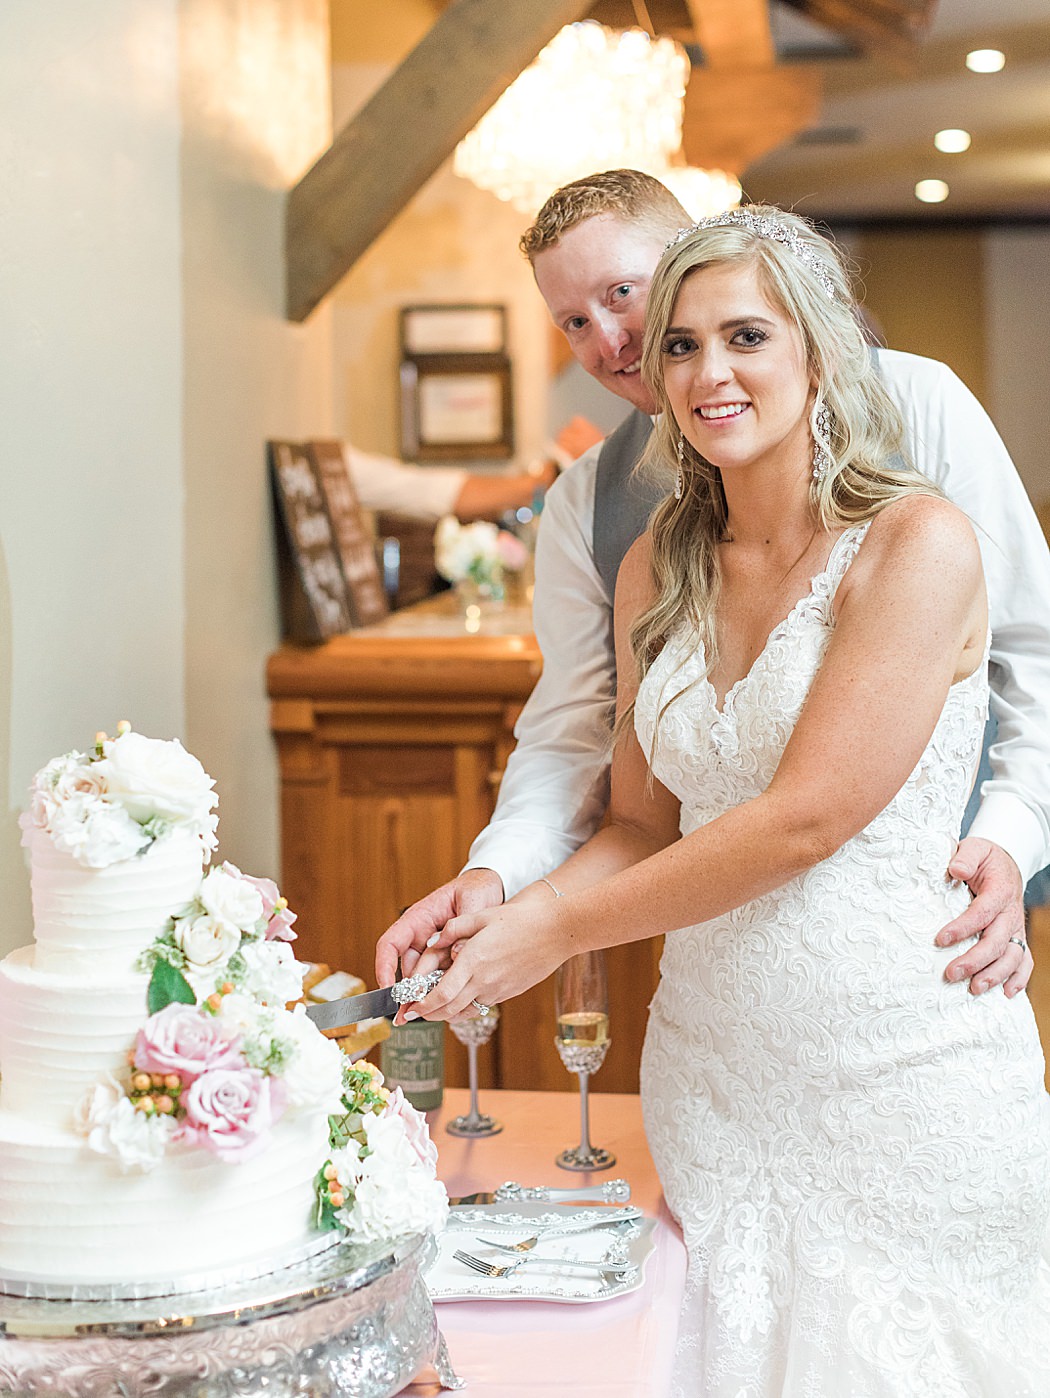 Summer Wedding at The Lodge at Country Inn Cottages in Fredericksburg Texas by Allison Jeffers Photography 0131